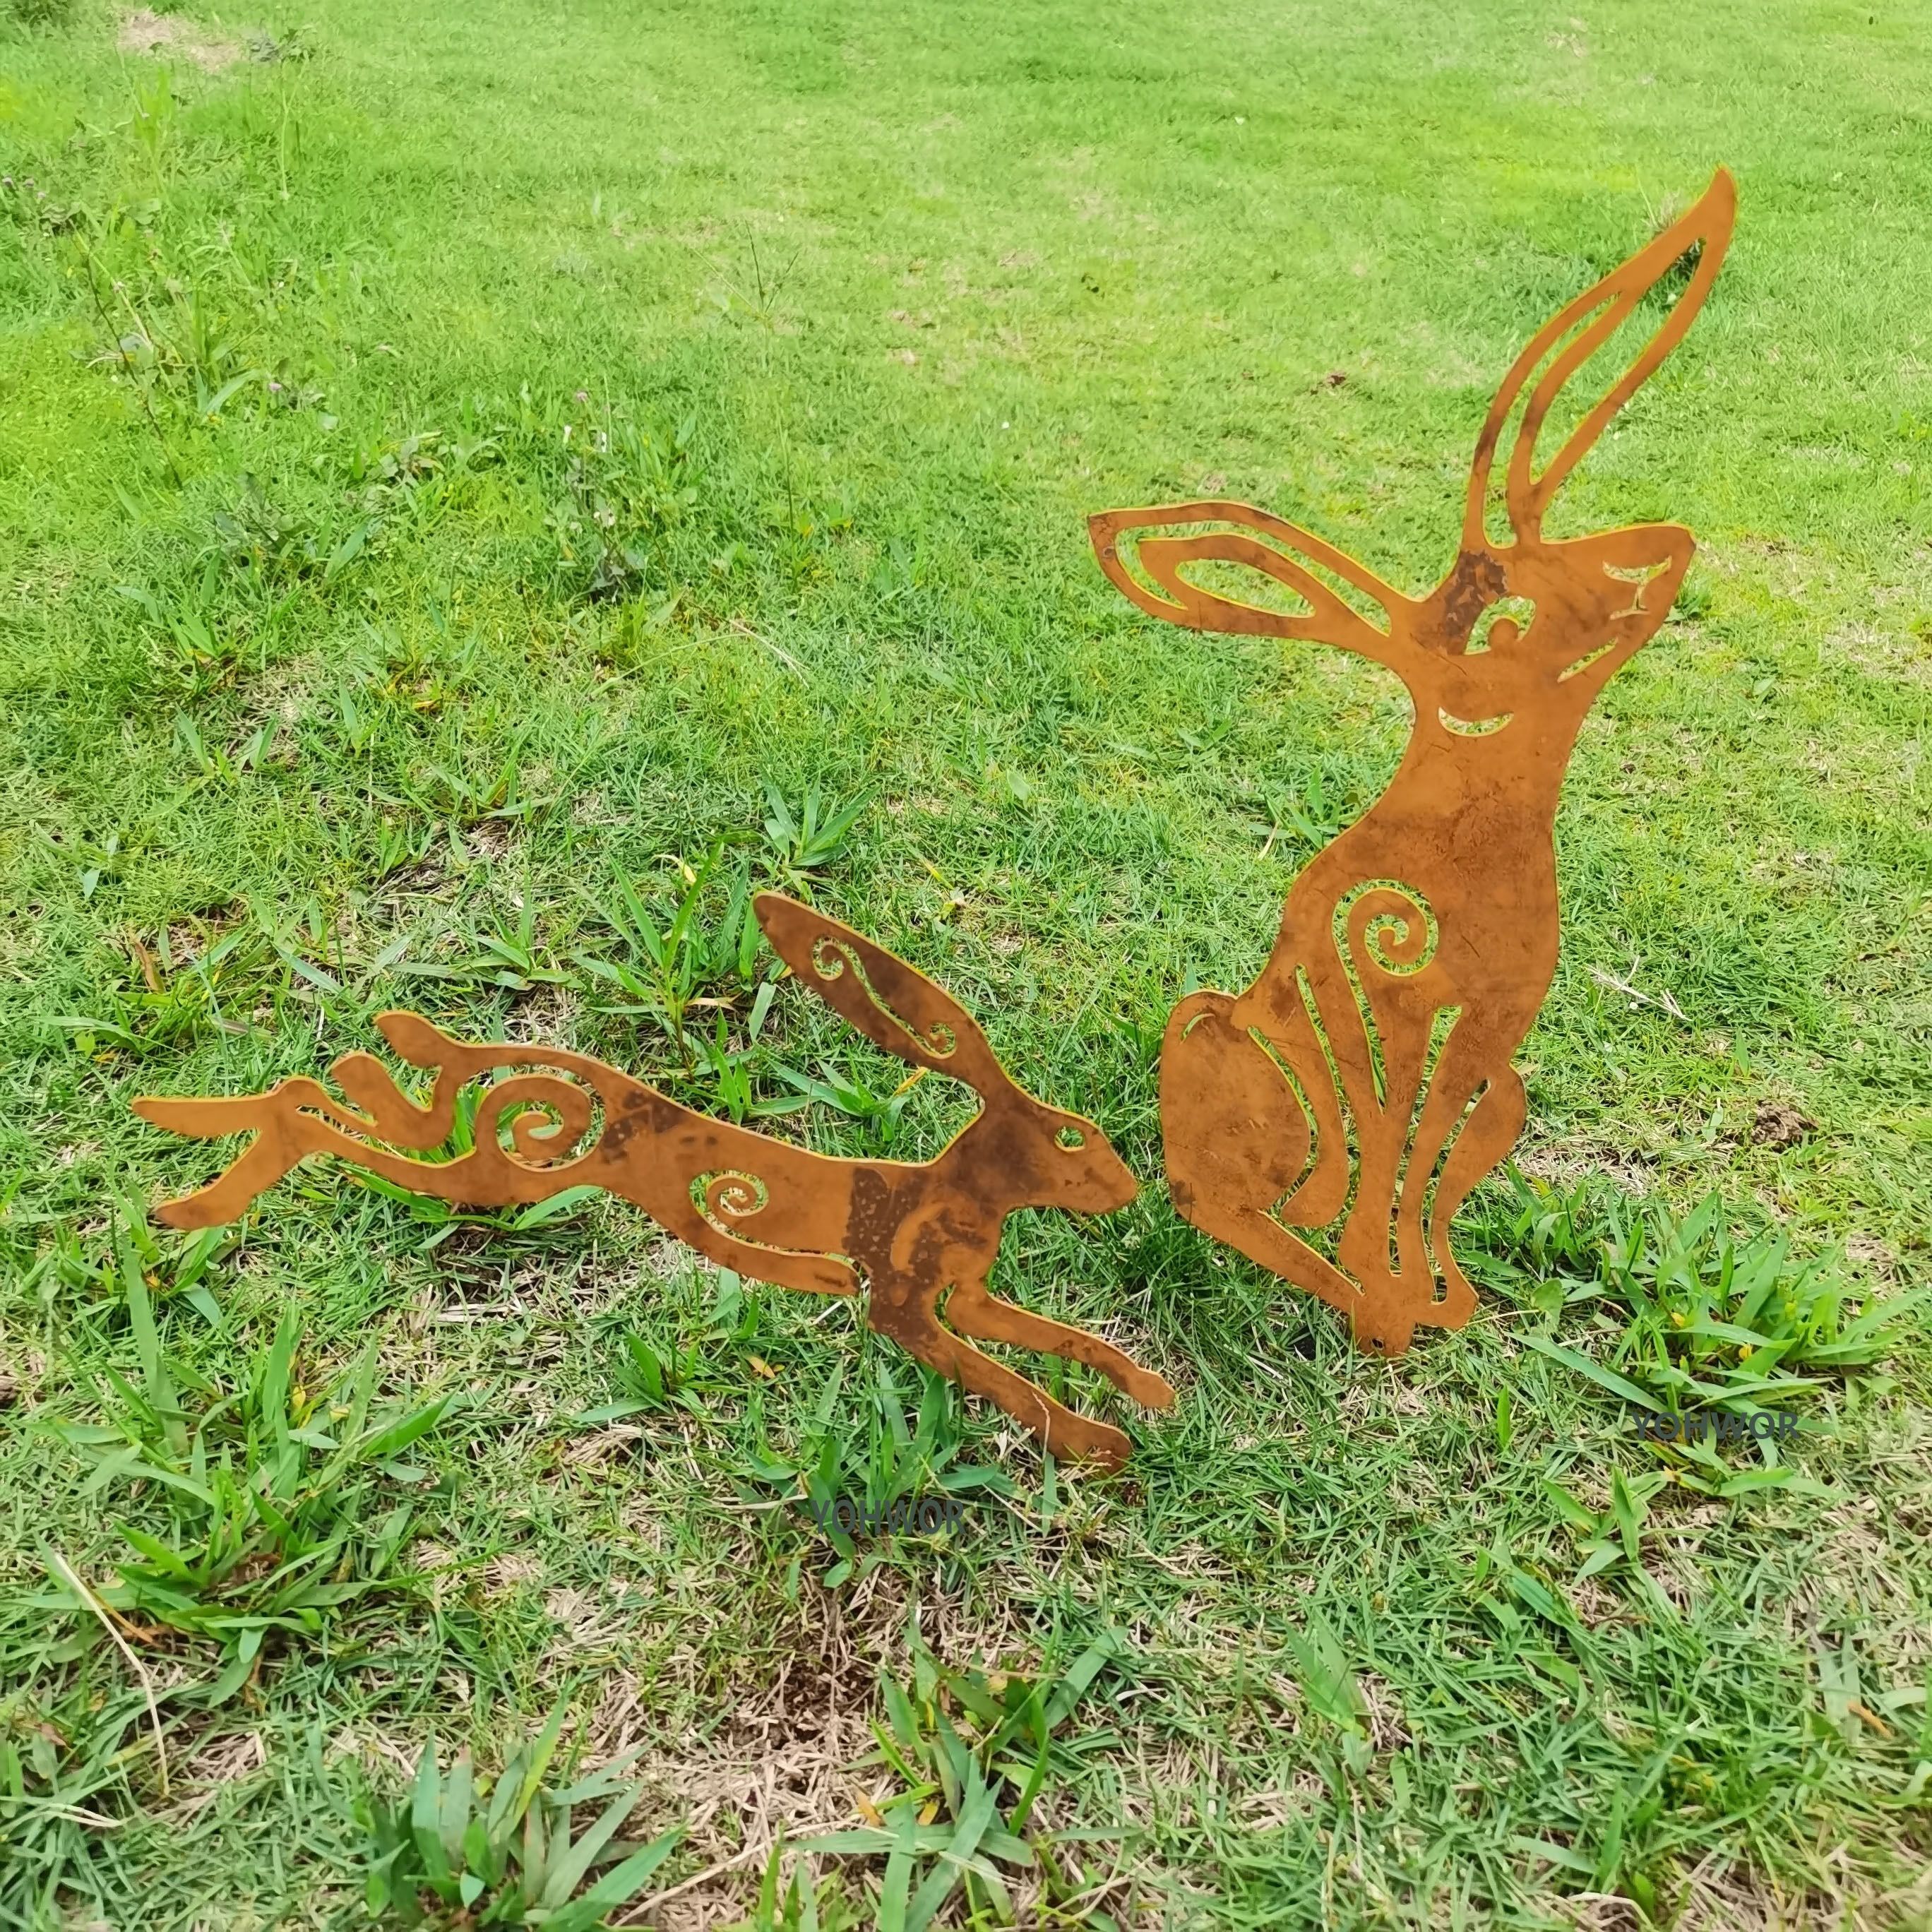 

Yohwor Rustic Metal Garden Stakes, Decorative Animal-themed Floor Mount Rabbit Silhouettes, Thanksgiving Outdoor Decor, No Electricity Or Battery Needed - Ideal For Mother's Day, Father's Day Gifts